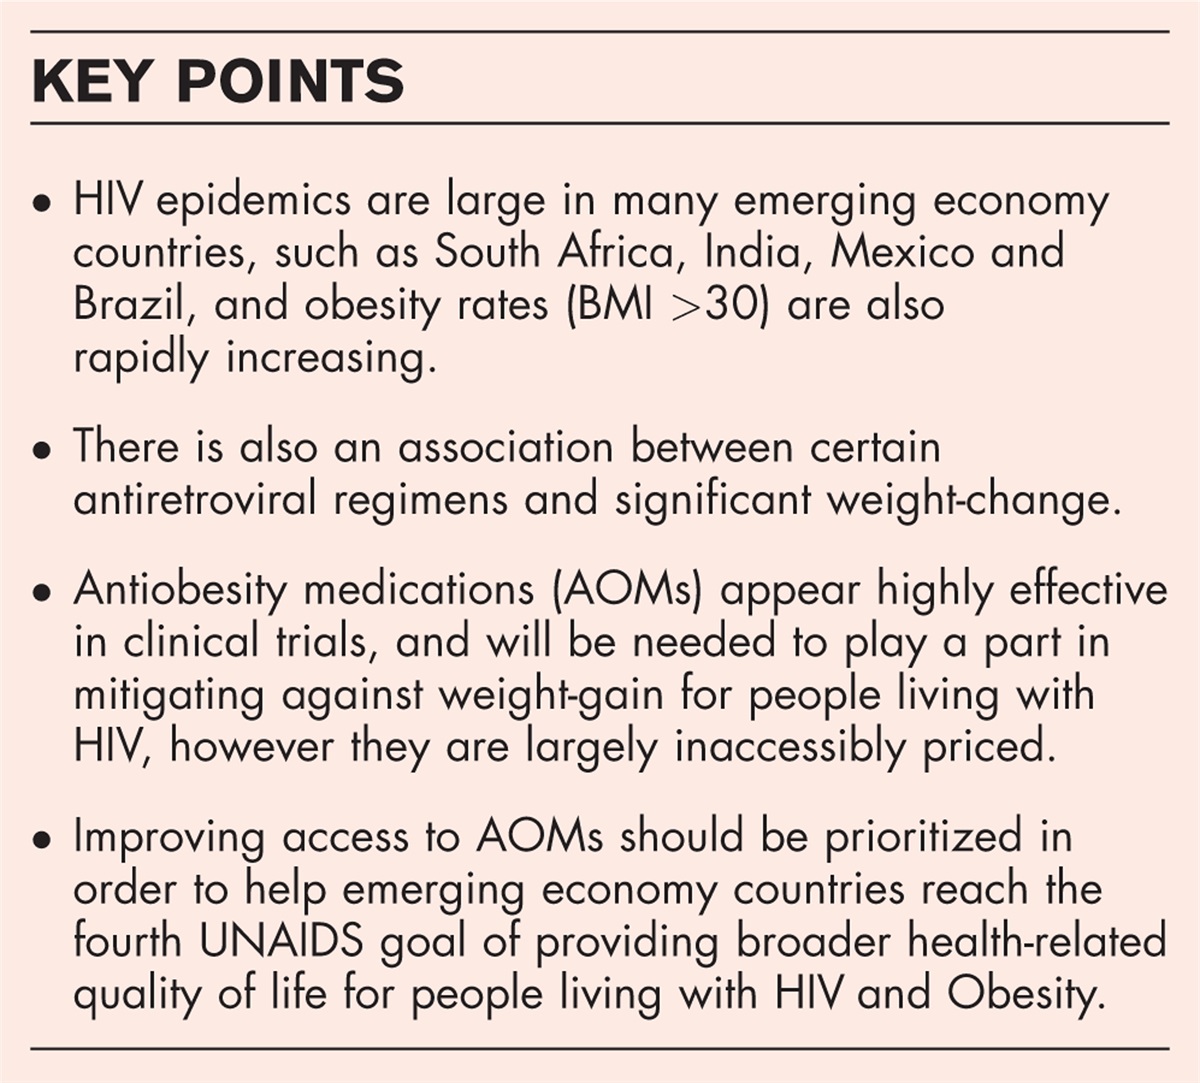 Intersections between HIV and obesity in emerging economies